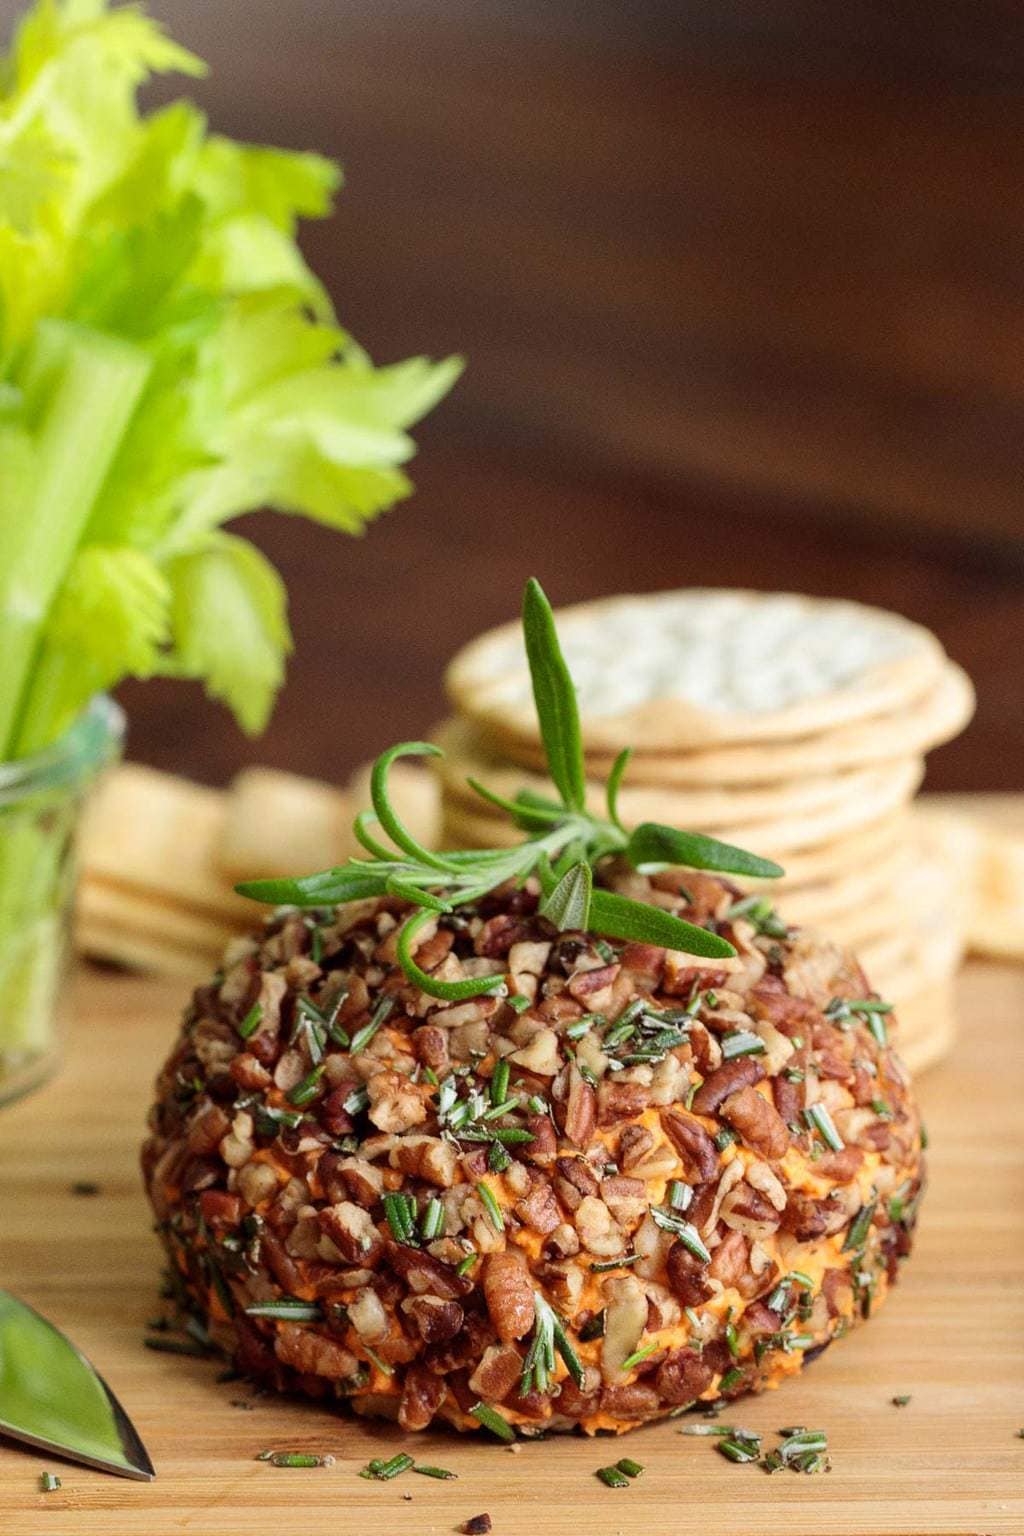 Photo of a Roasted Red Pepper Goat Cheese Ball on a bamboo cutting board with celery and crackers in the background.